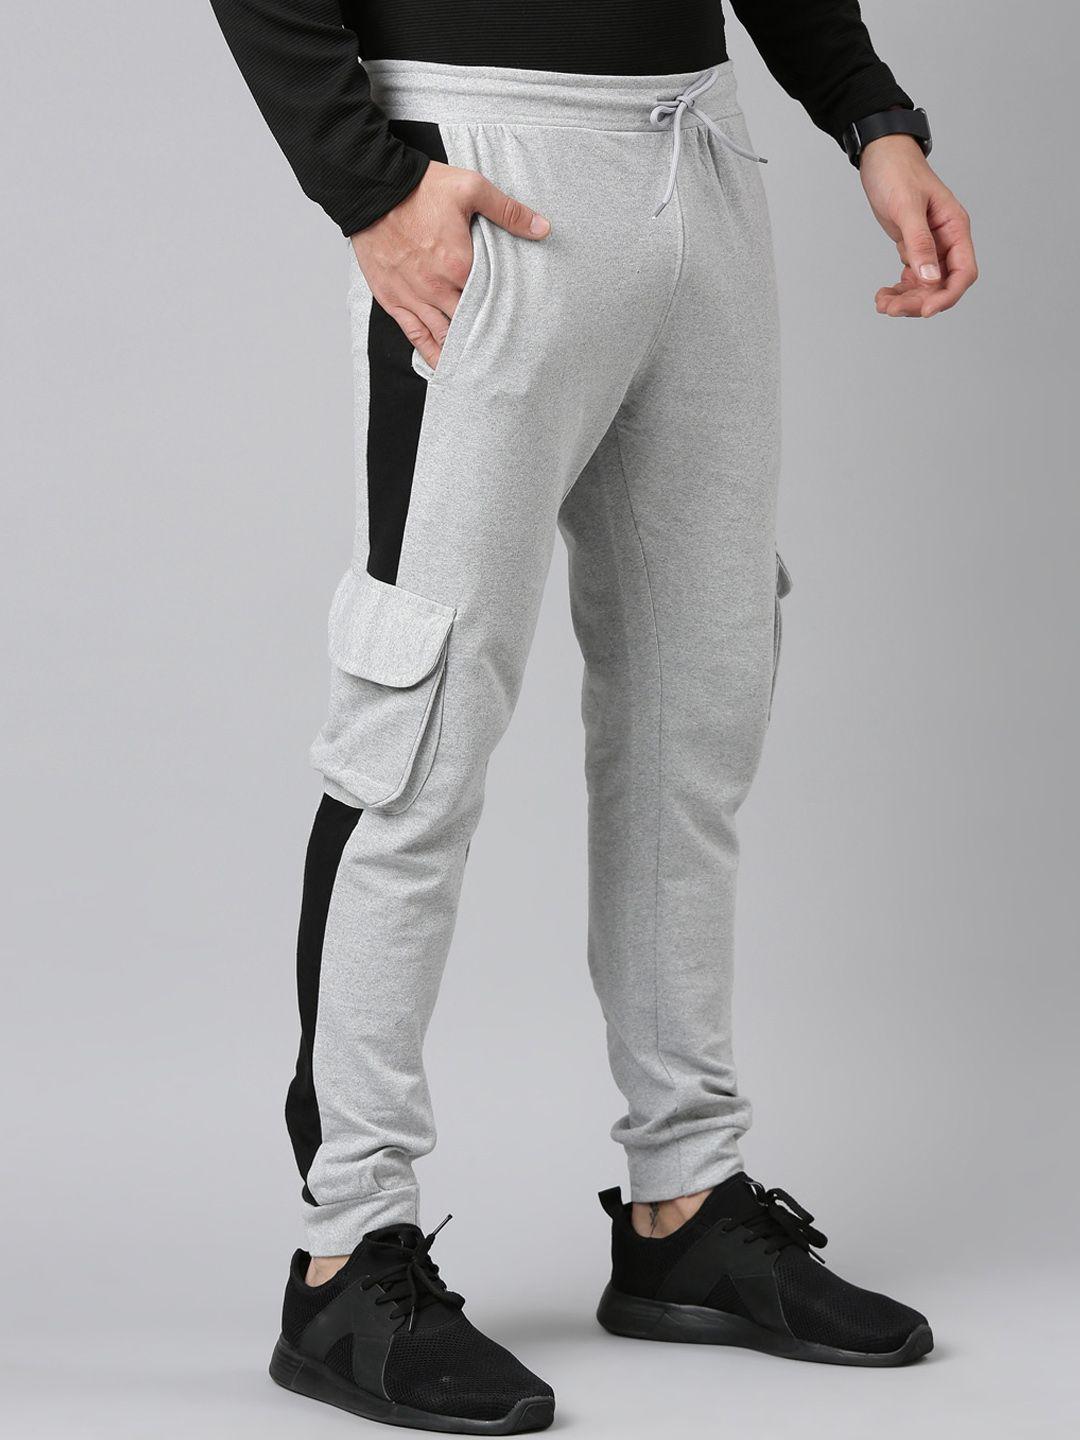 madsto men striped training or gym cotton joggers